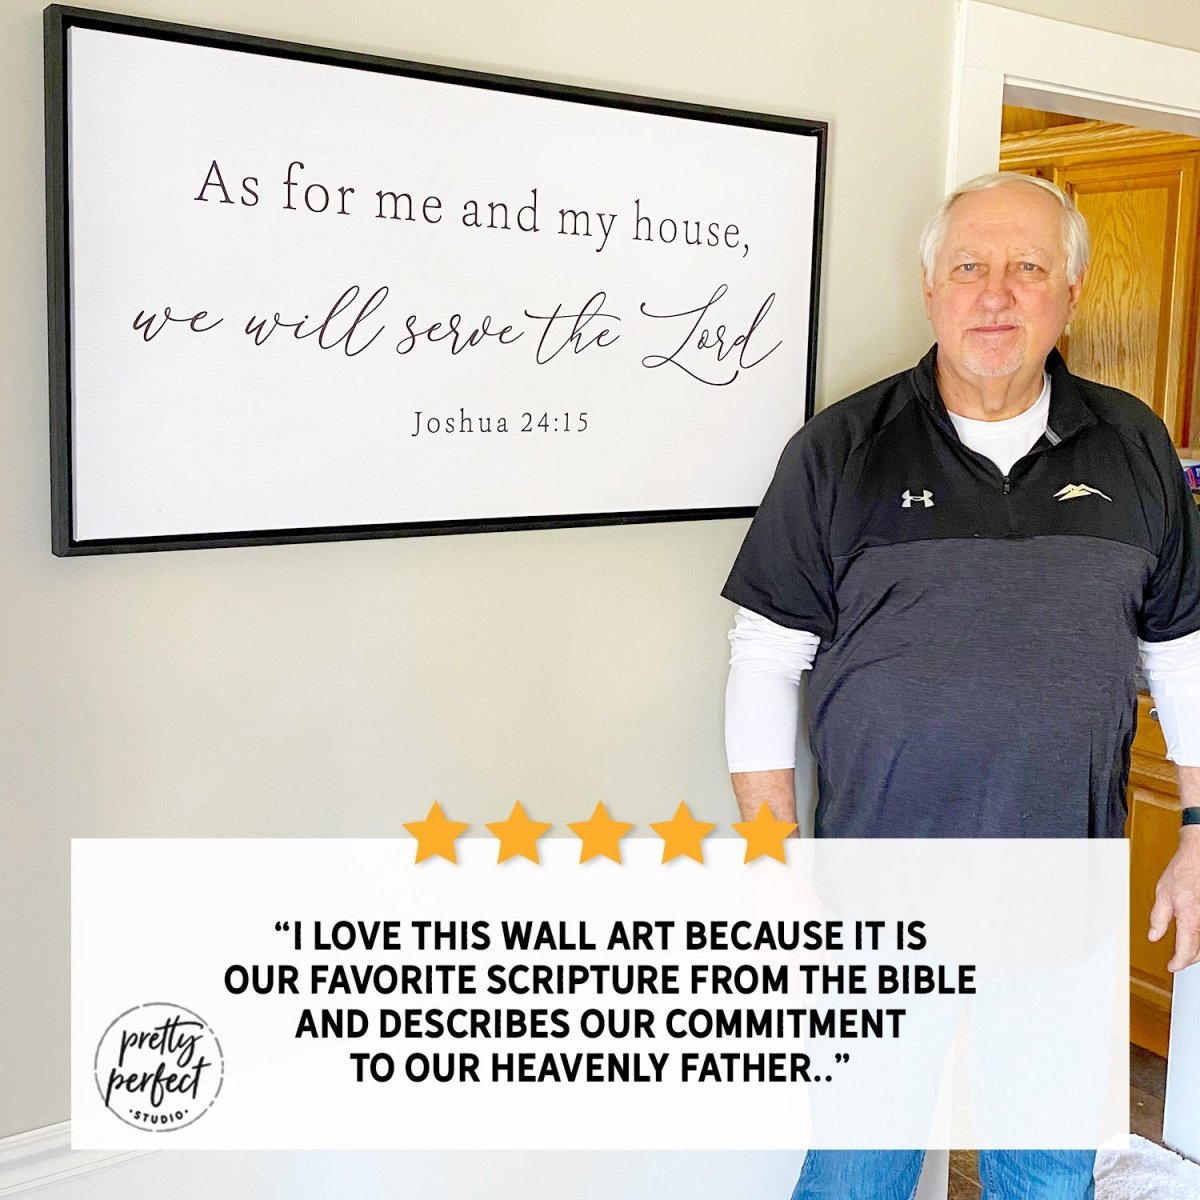 Customer product review for Joshua 24:15 wall art by Pretty Perfect Studio